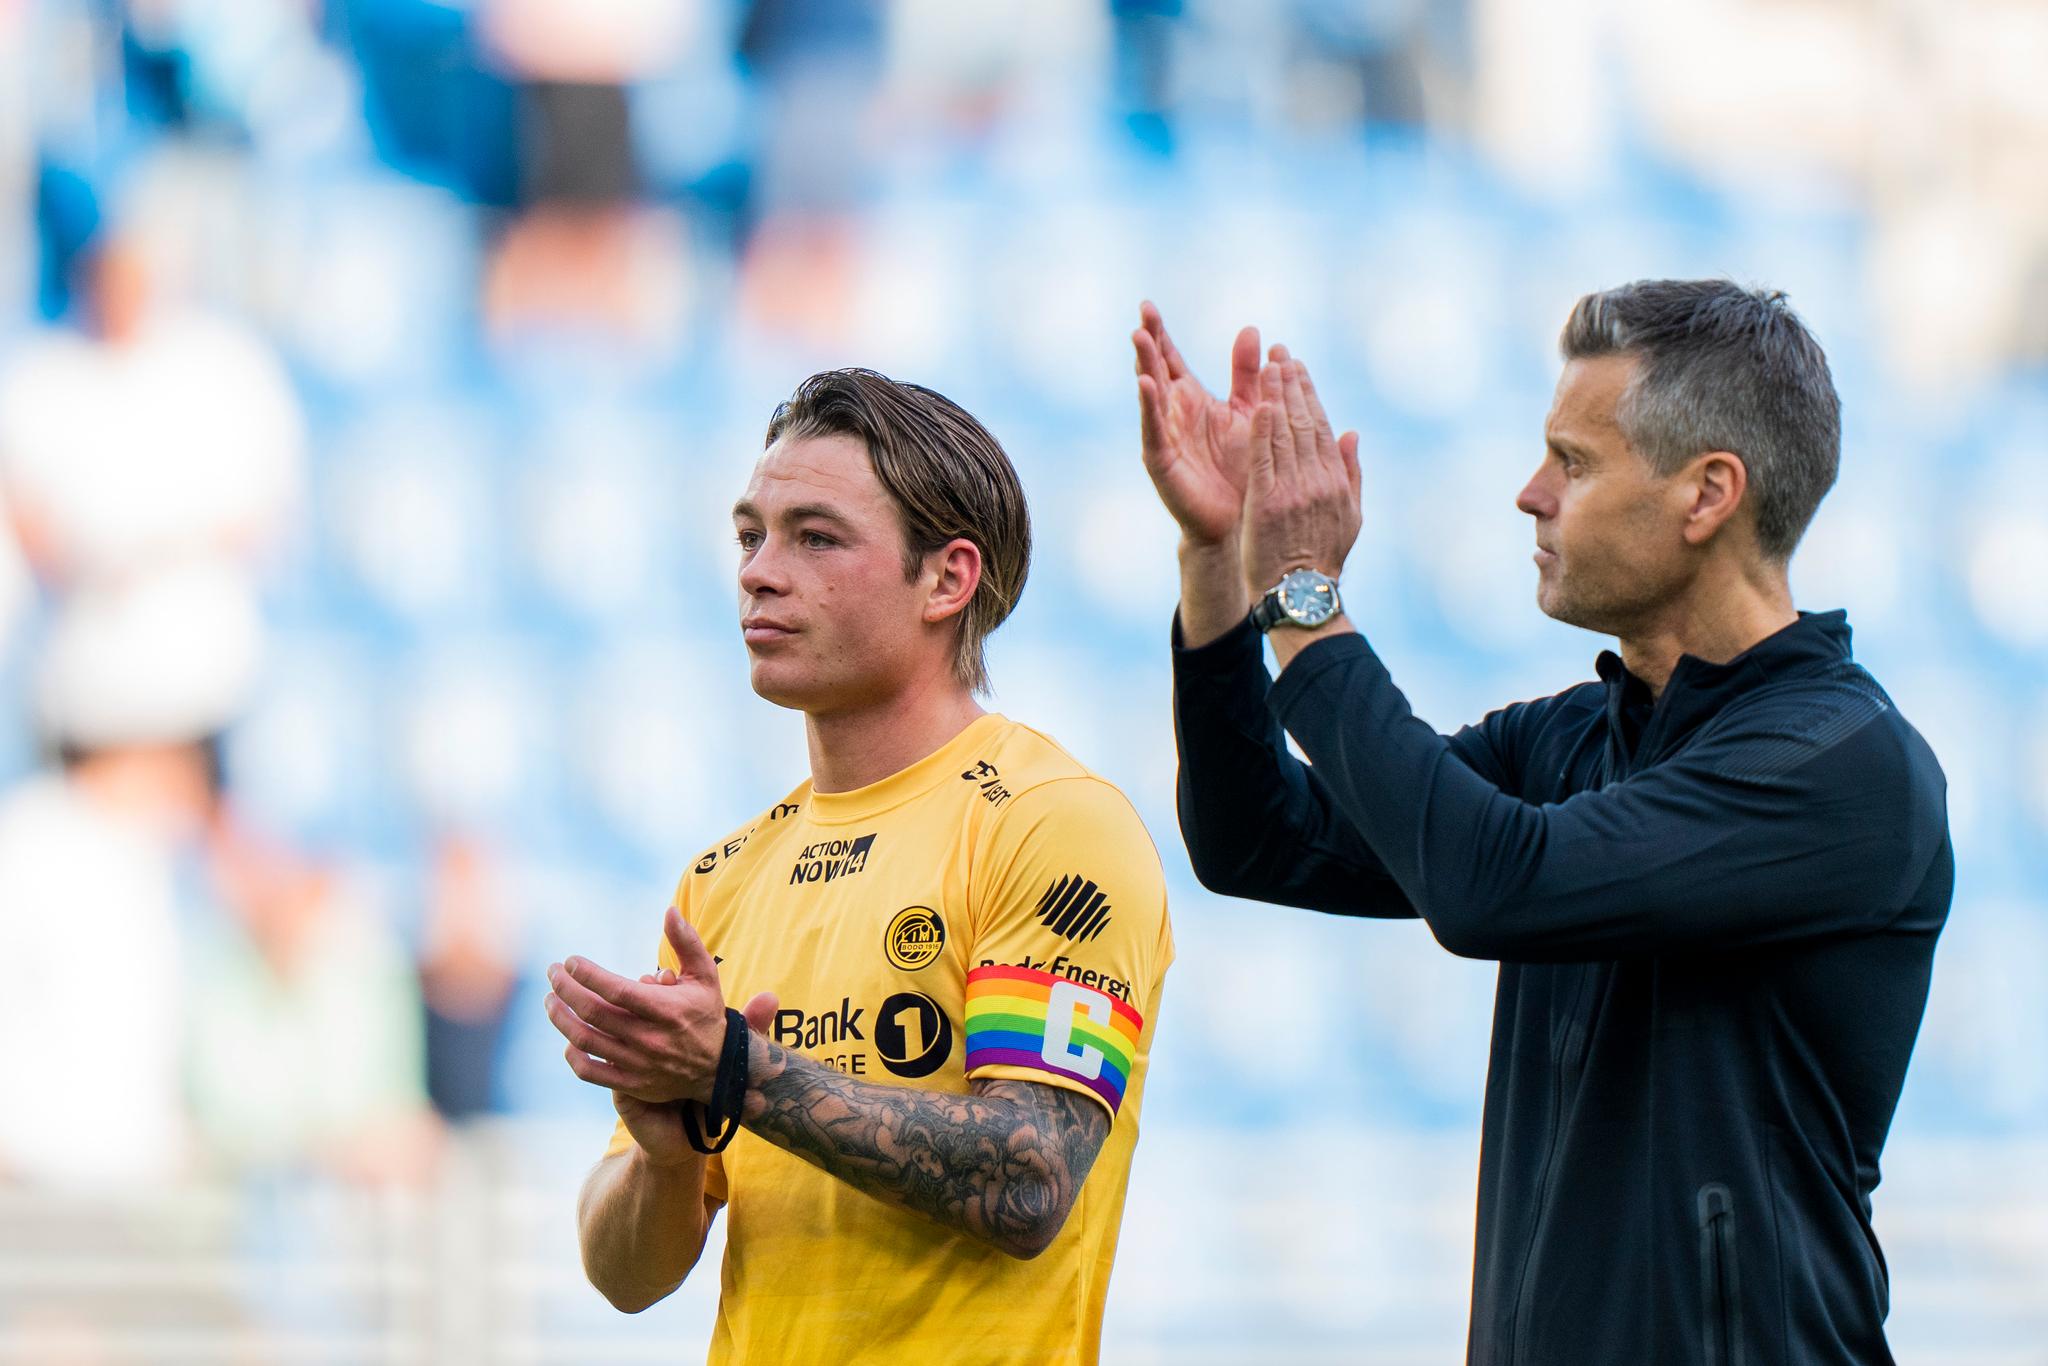 Glimt milled: The chief referee admits the referee’s mistake